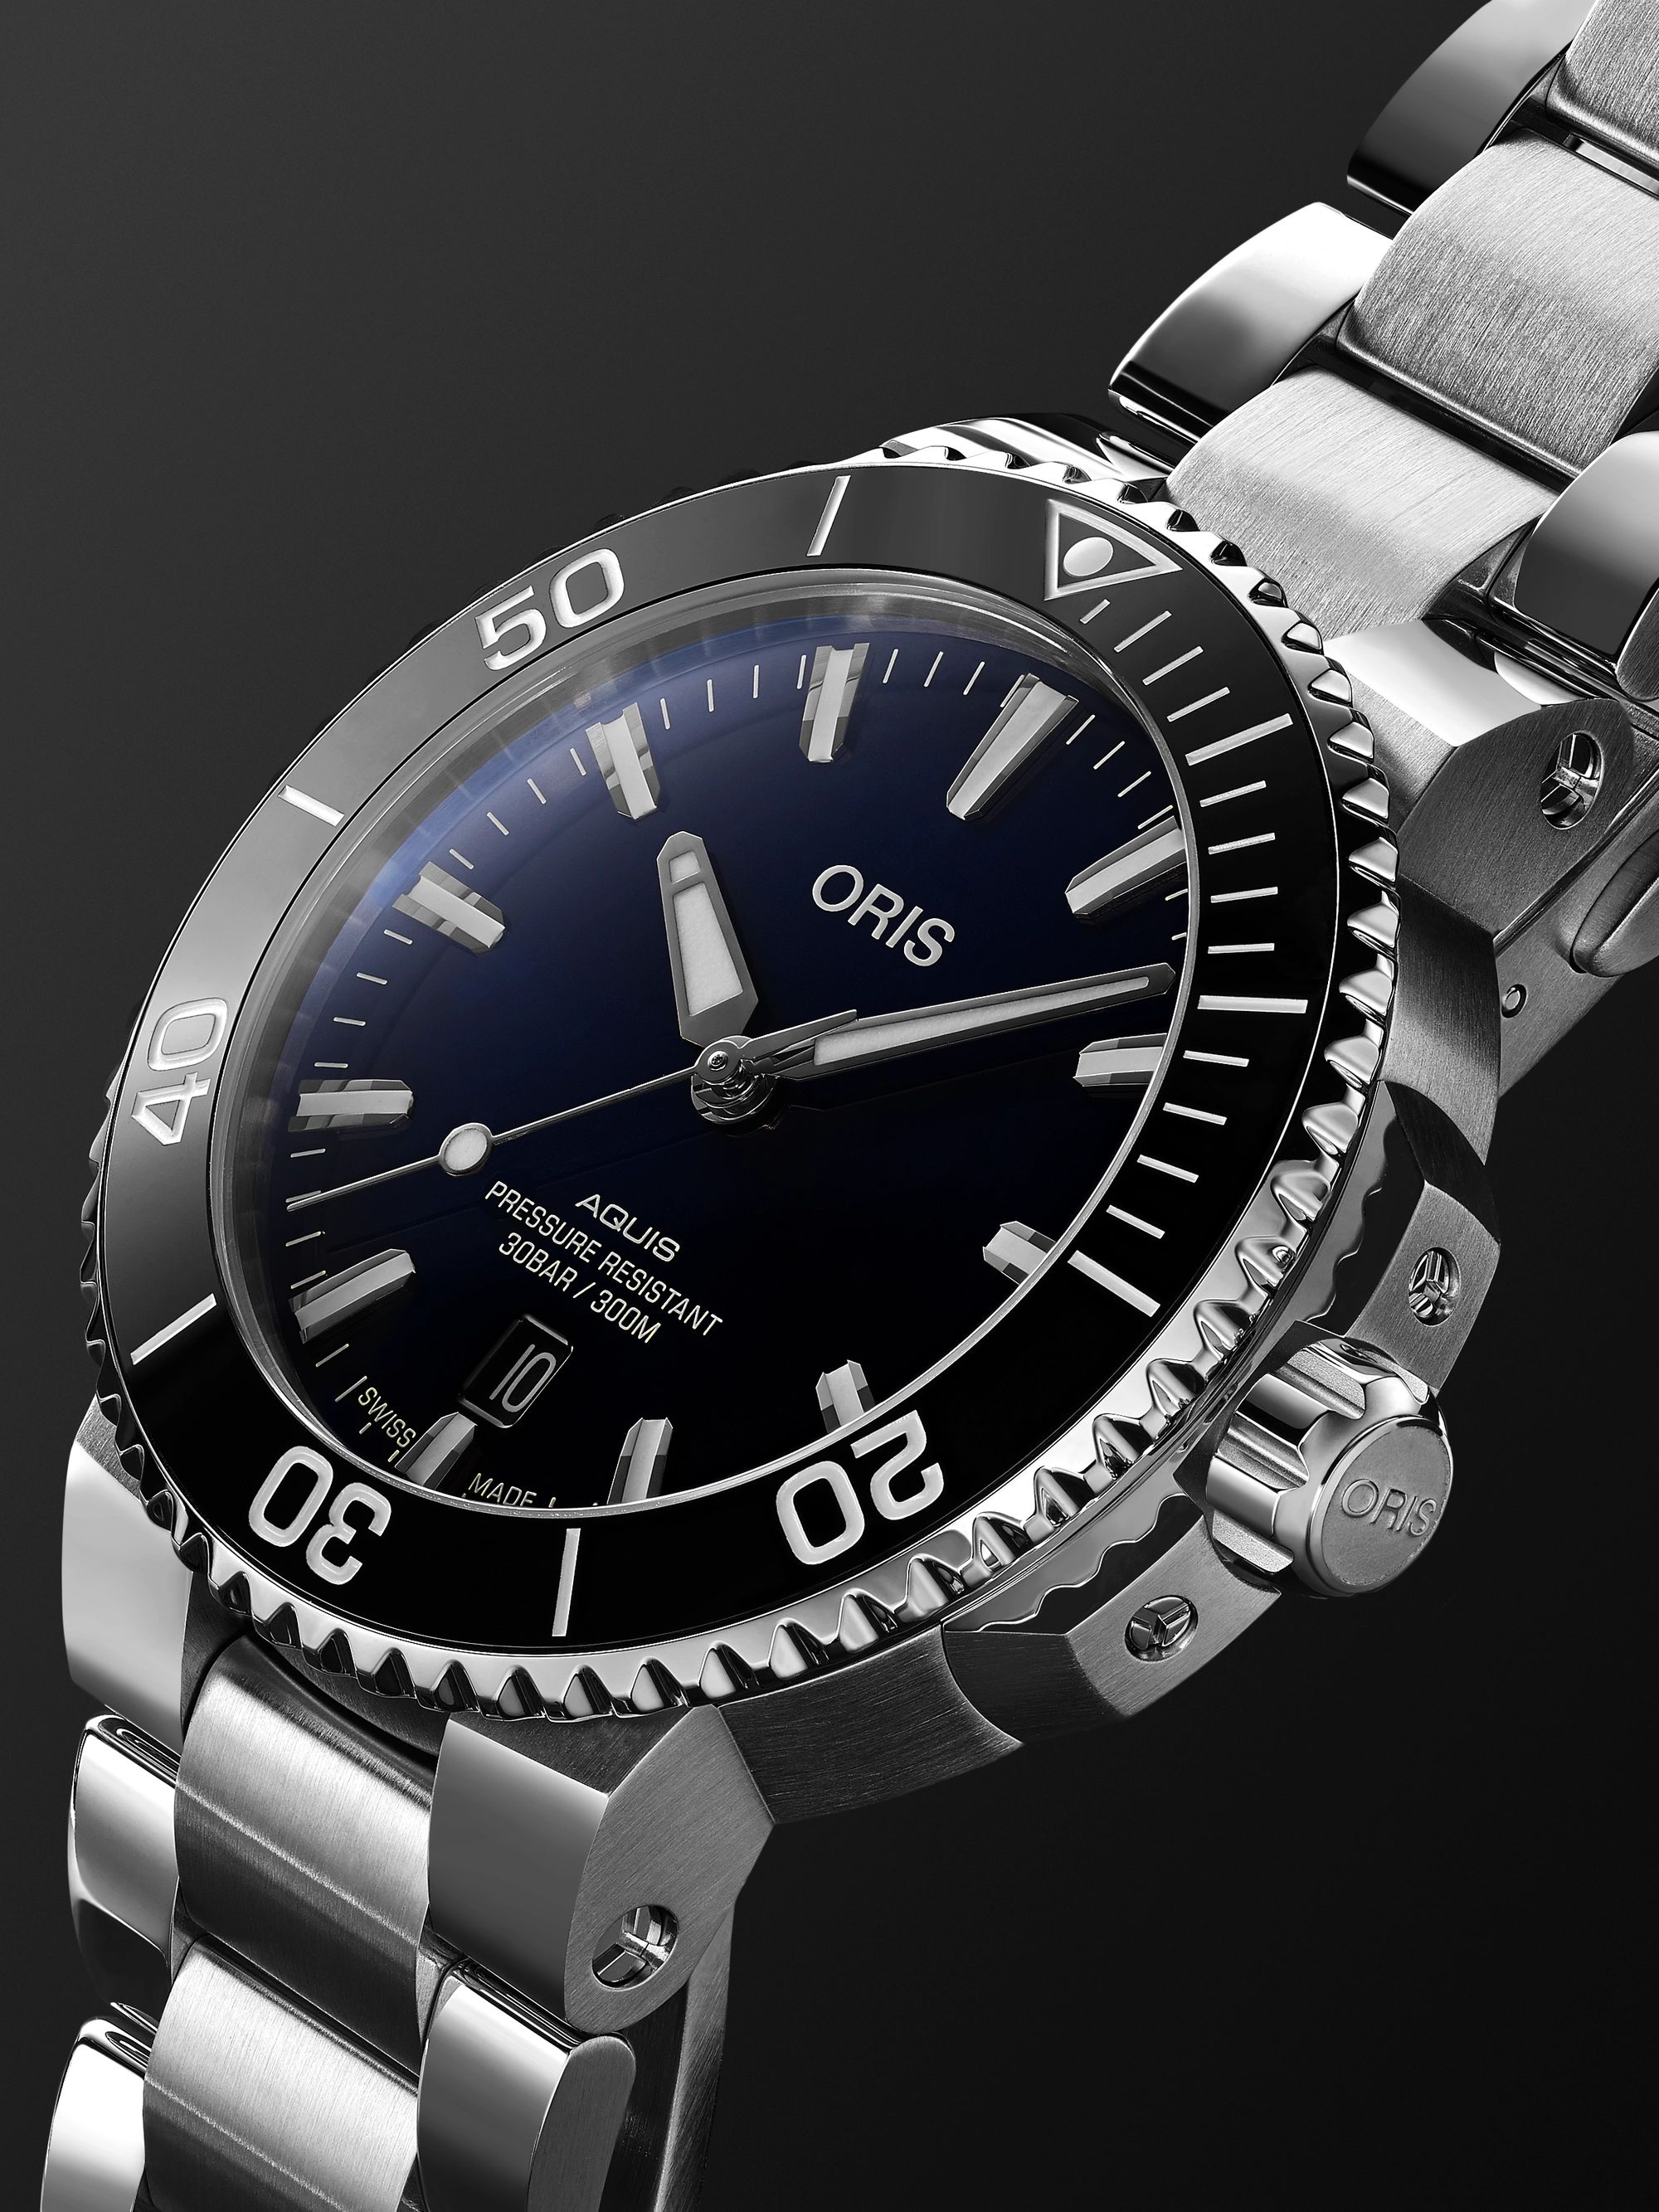 ORIS Aquis Date Automatic 41.5mm Stainless Steel Watch, Ref. No. 01 733 7766 4135-07 8 22 05PEB